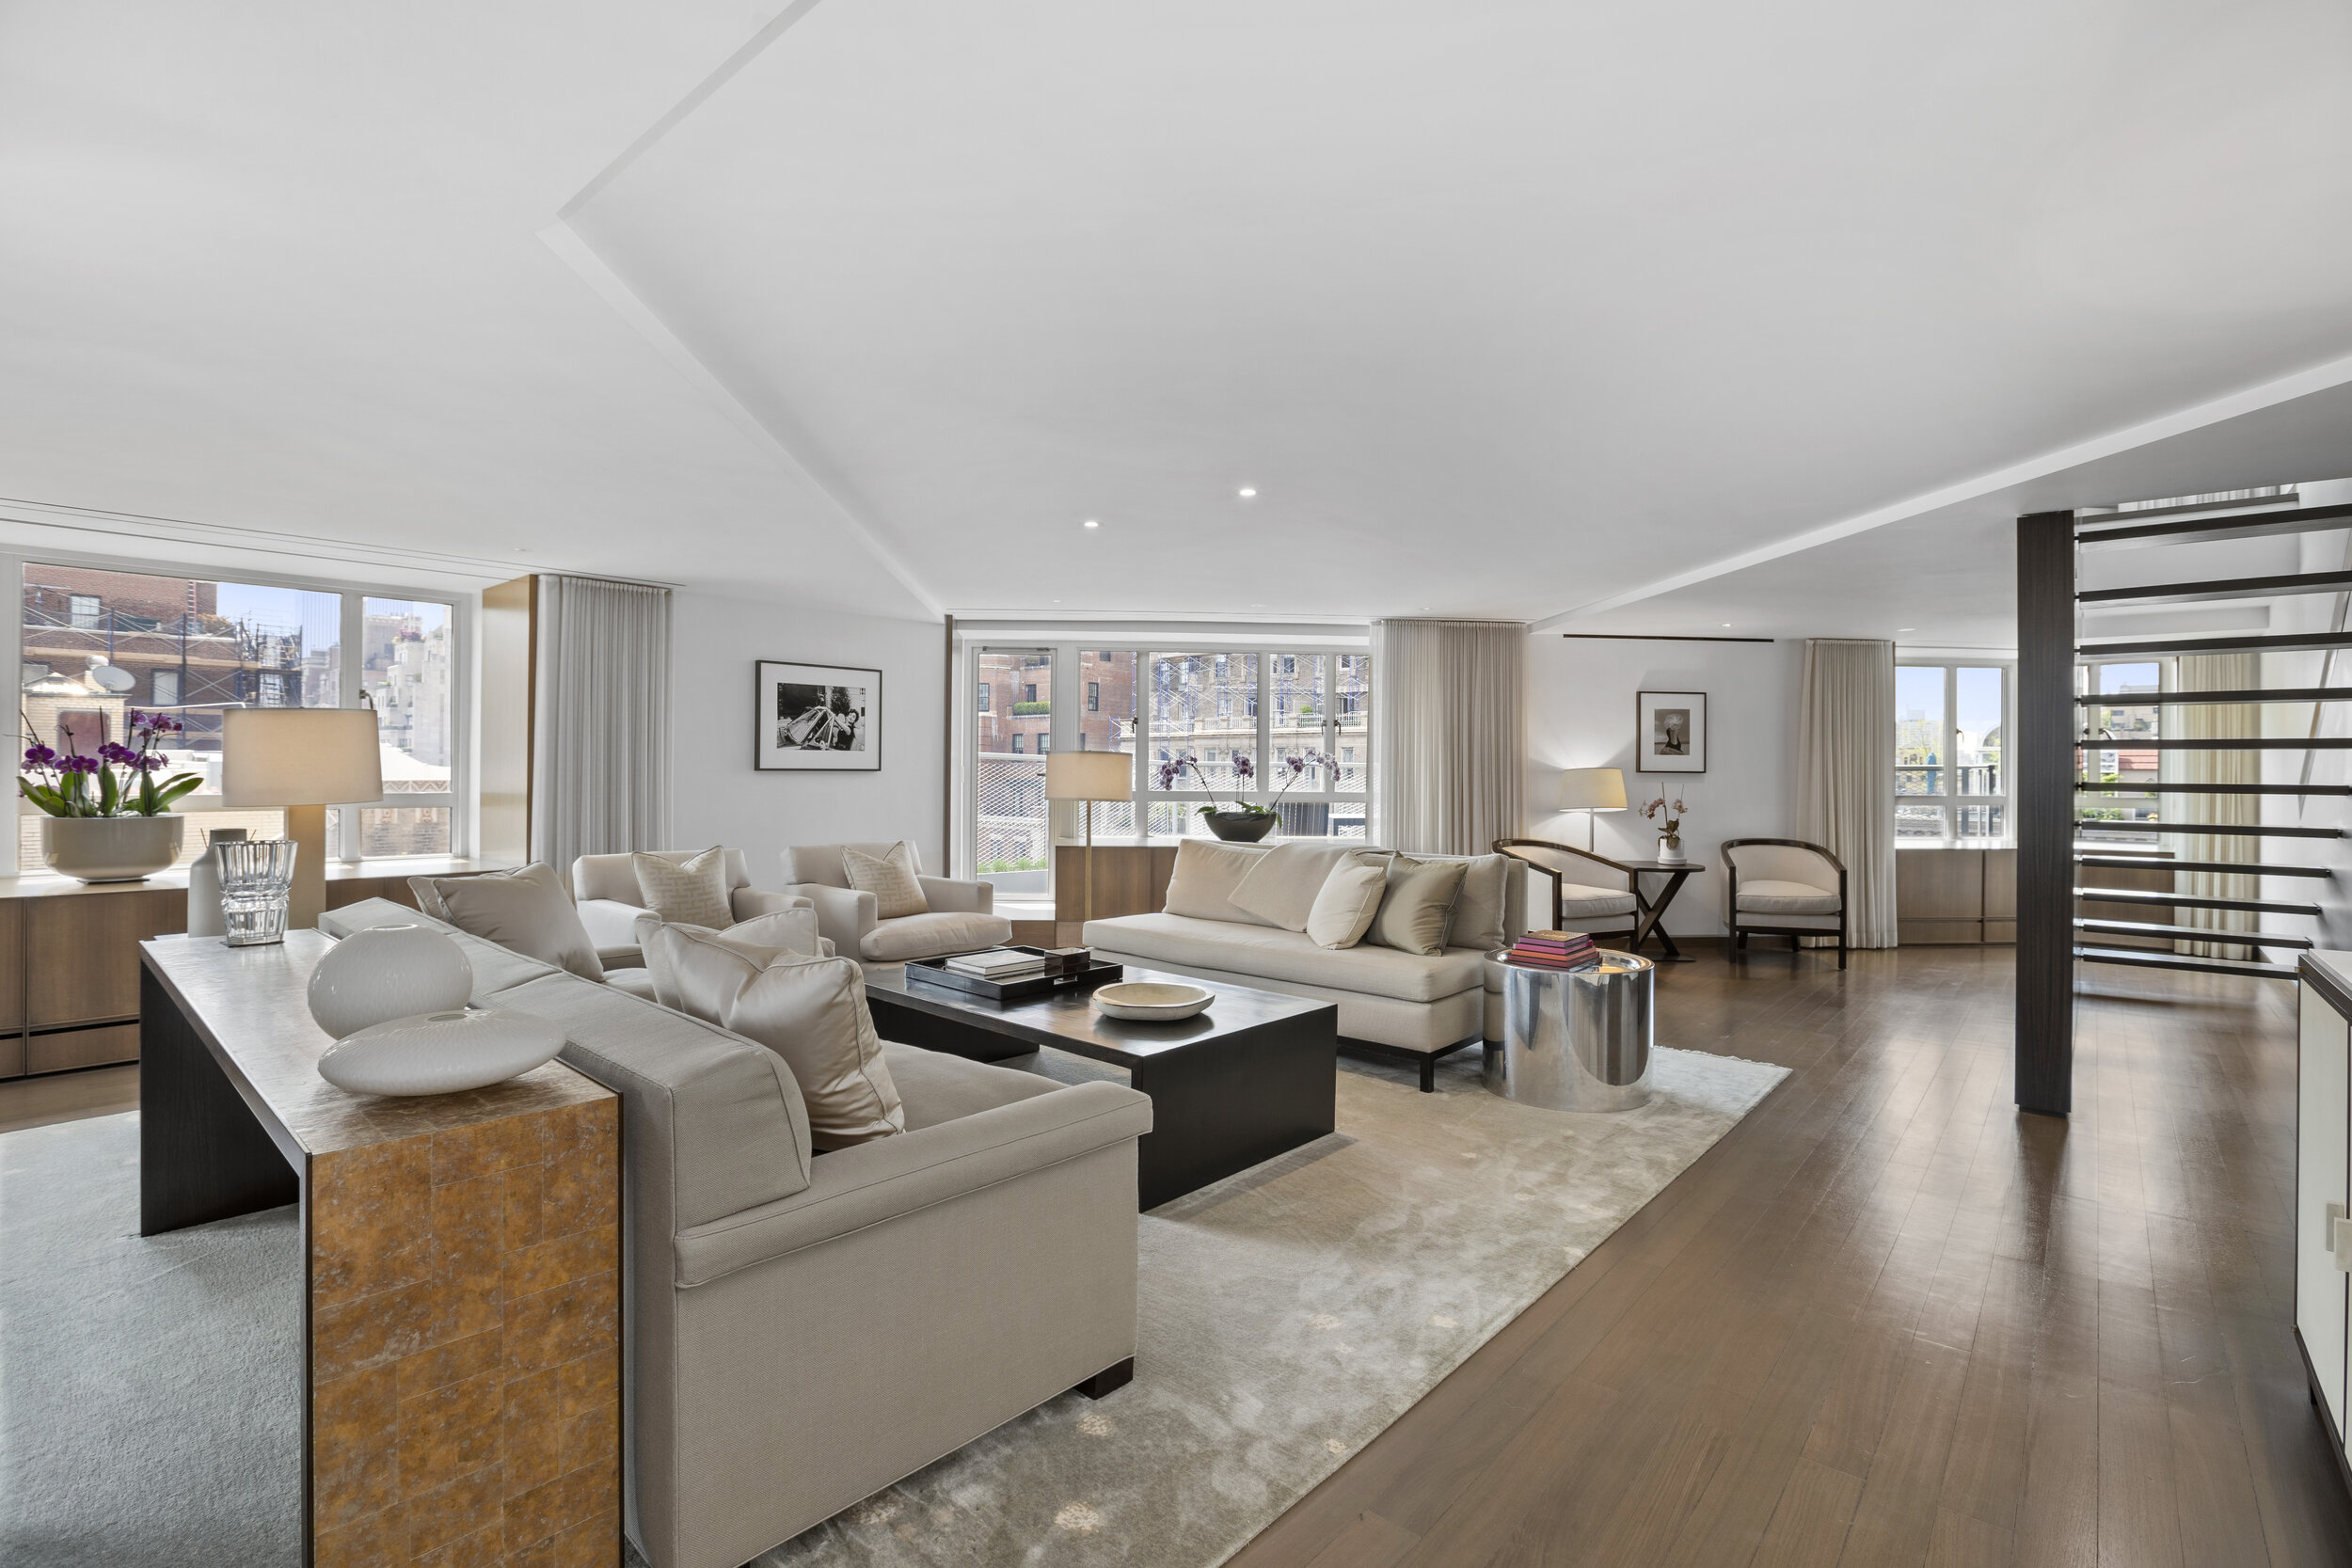  The home has a sprawling double-living room with open south and west exposures and access to a decked terrace with views of Park Acenue and Central Park. There is a large formal dining room, also with access to its own planted terrace – which has an